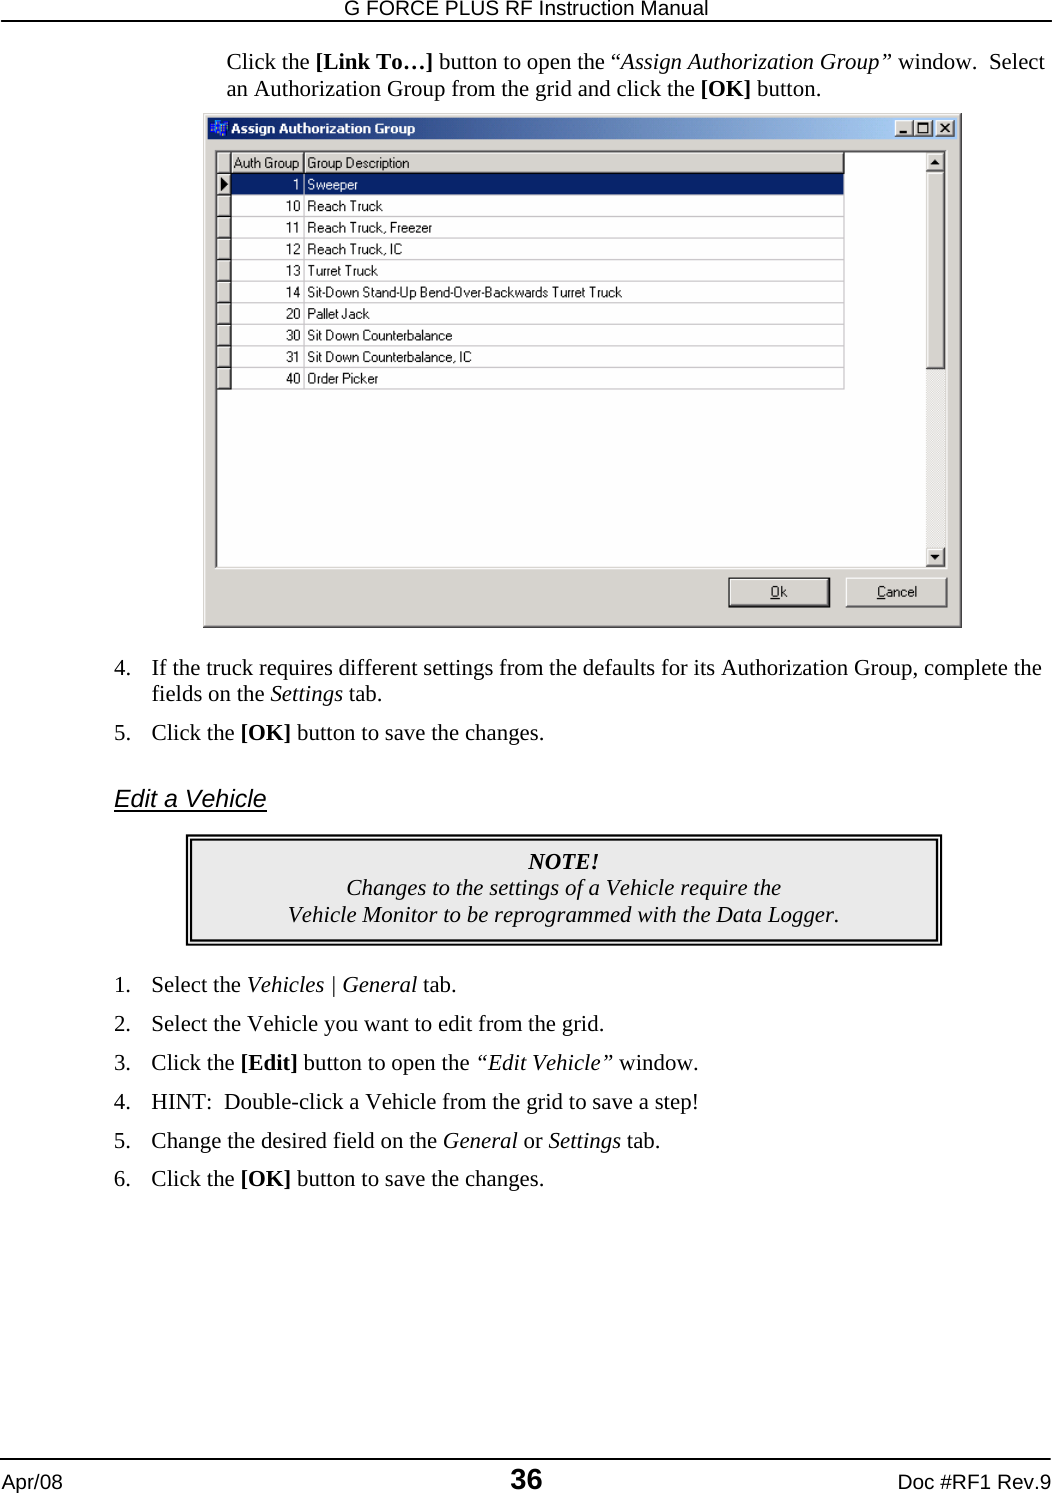 G FORCE PLUS RF Instruction Manual   Apr/08 36 Doc #RF1 Rev.9 Click the [Link To…] button to open the “Assign Authorization Group” window.  Select an Authorization Group from the grid and click the [OK] button.   4. If the truck requires different settings from the defaults for its Authorization Group, complete the fields on the Settings tab. 5. Click the [OK] button to save the changes.  Edit a Vehicle       1. Select the Vehicles | General tab. 2. Select the Vehicle you want to edit from the grid. 3. Click the [Edit] button to open the “Edit Vehicle” window. 4. HINT:  Double-click a Vehicle from the grid to save a step! 5. Change the desired field on the General or Settings tab.  6. Click the [OK] button to save the changes.  NOTE! Changes to the settings of a Vehicle require the  Vehicle Monitor to be reprogrammed with the Data Logger. 